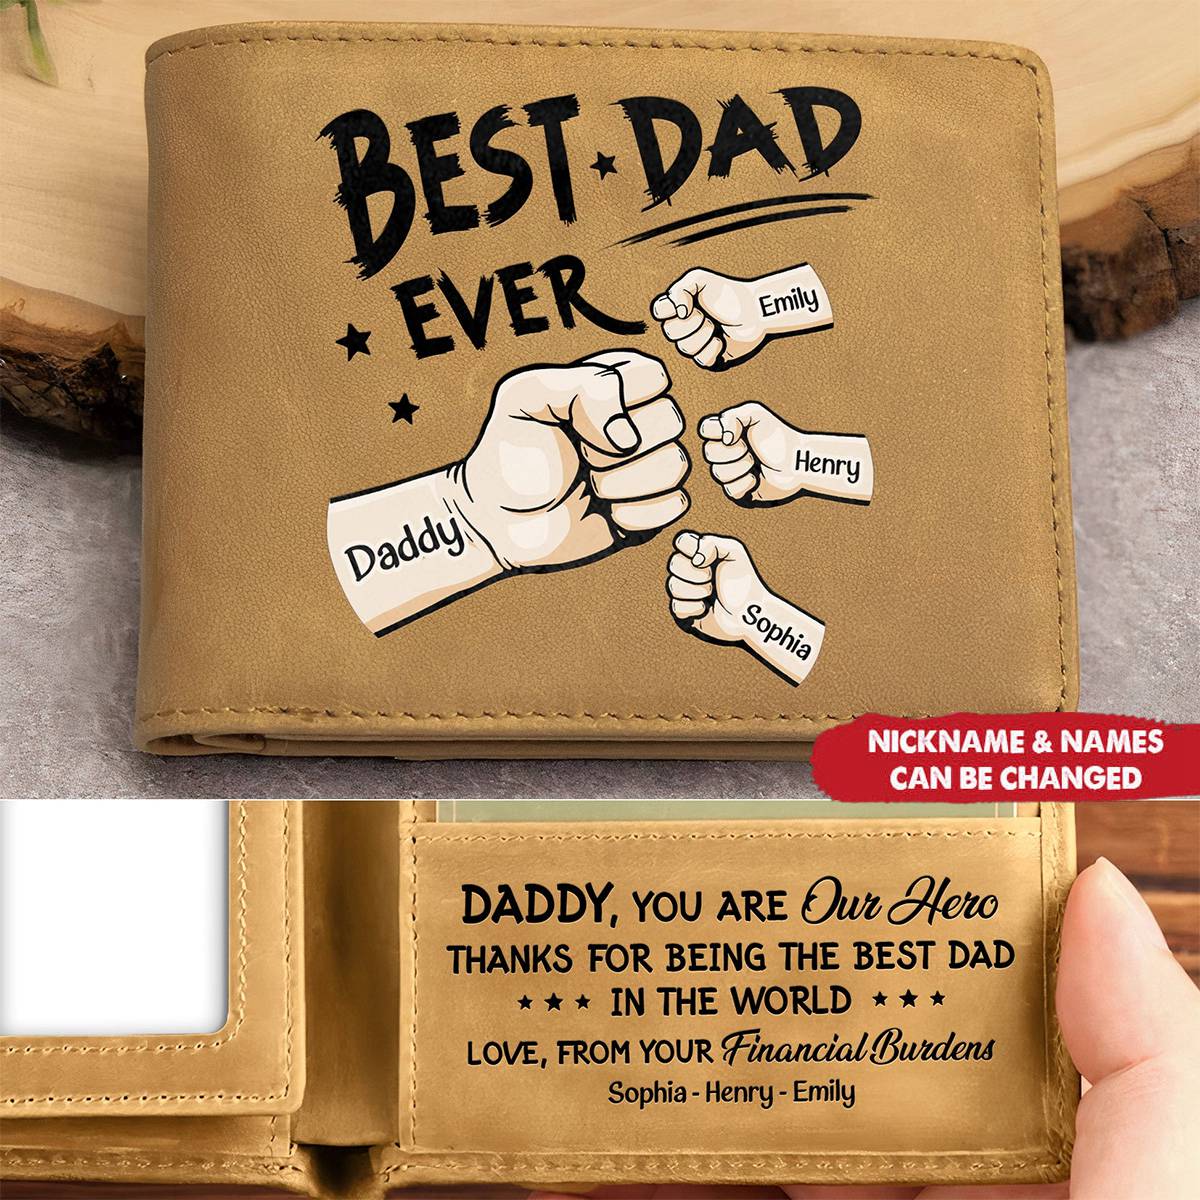 Best Dad Ever New Version - Personalized Leather Wallet